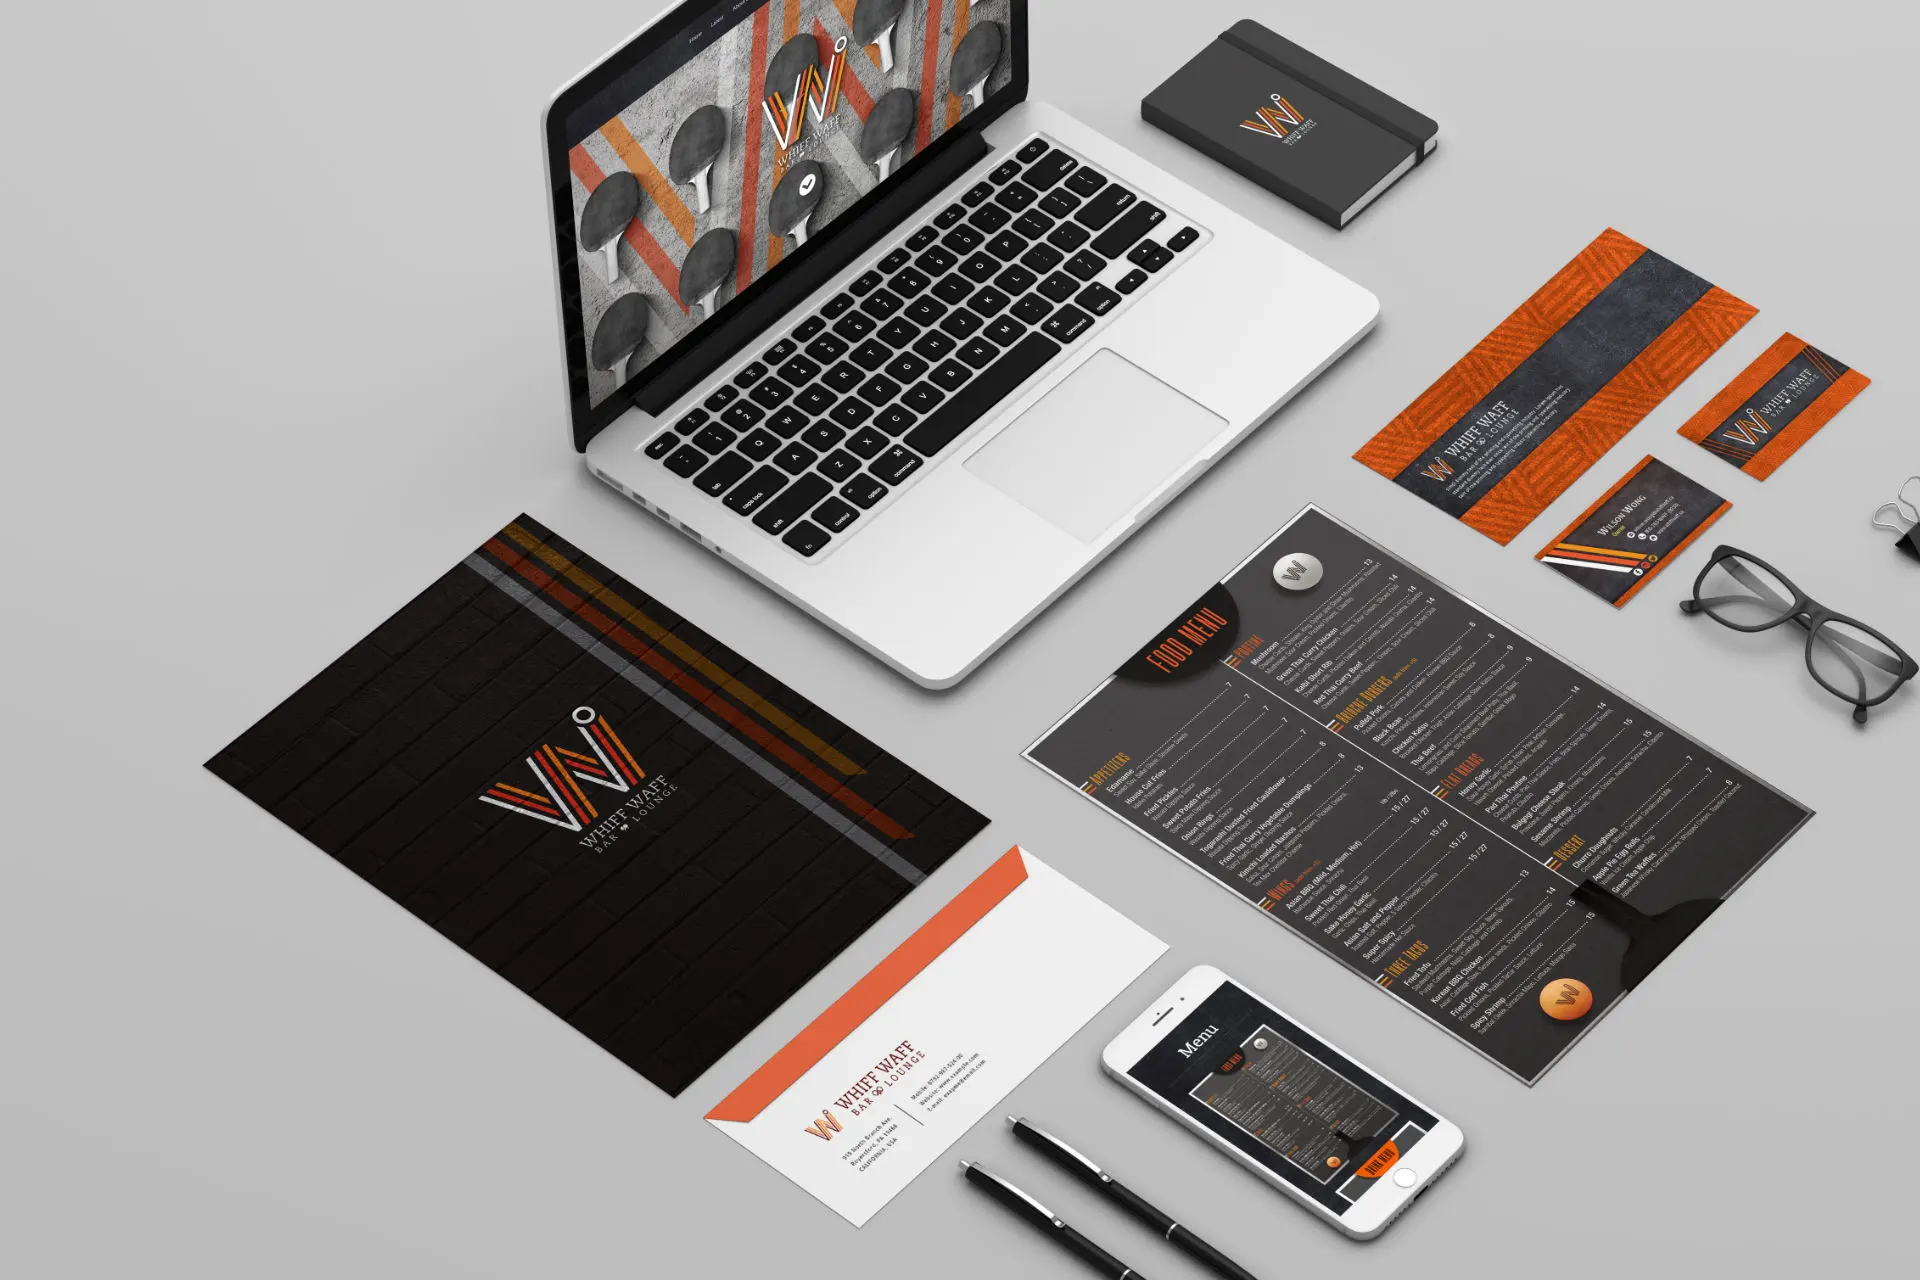 Graphic design project for Whiff Waff Bar & Lounge. Designed corporate identity able to print all the items in a timely and cost friendly manner.